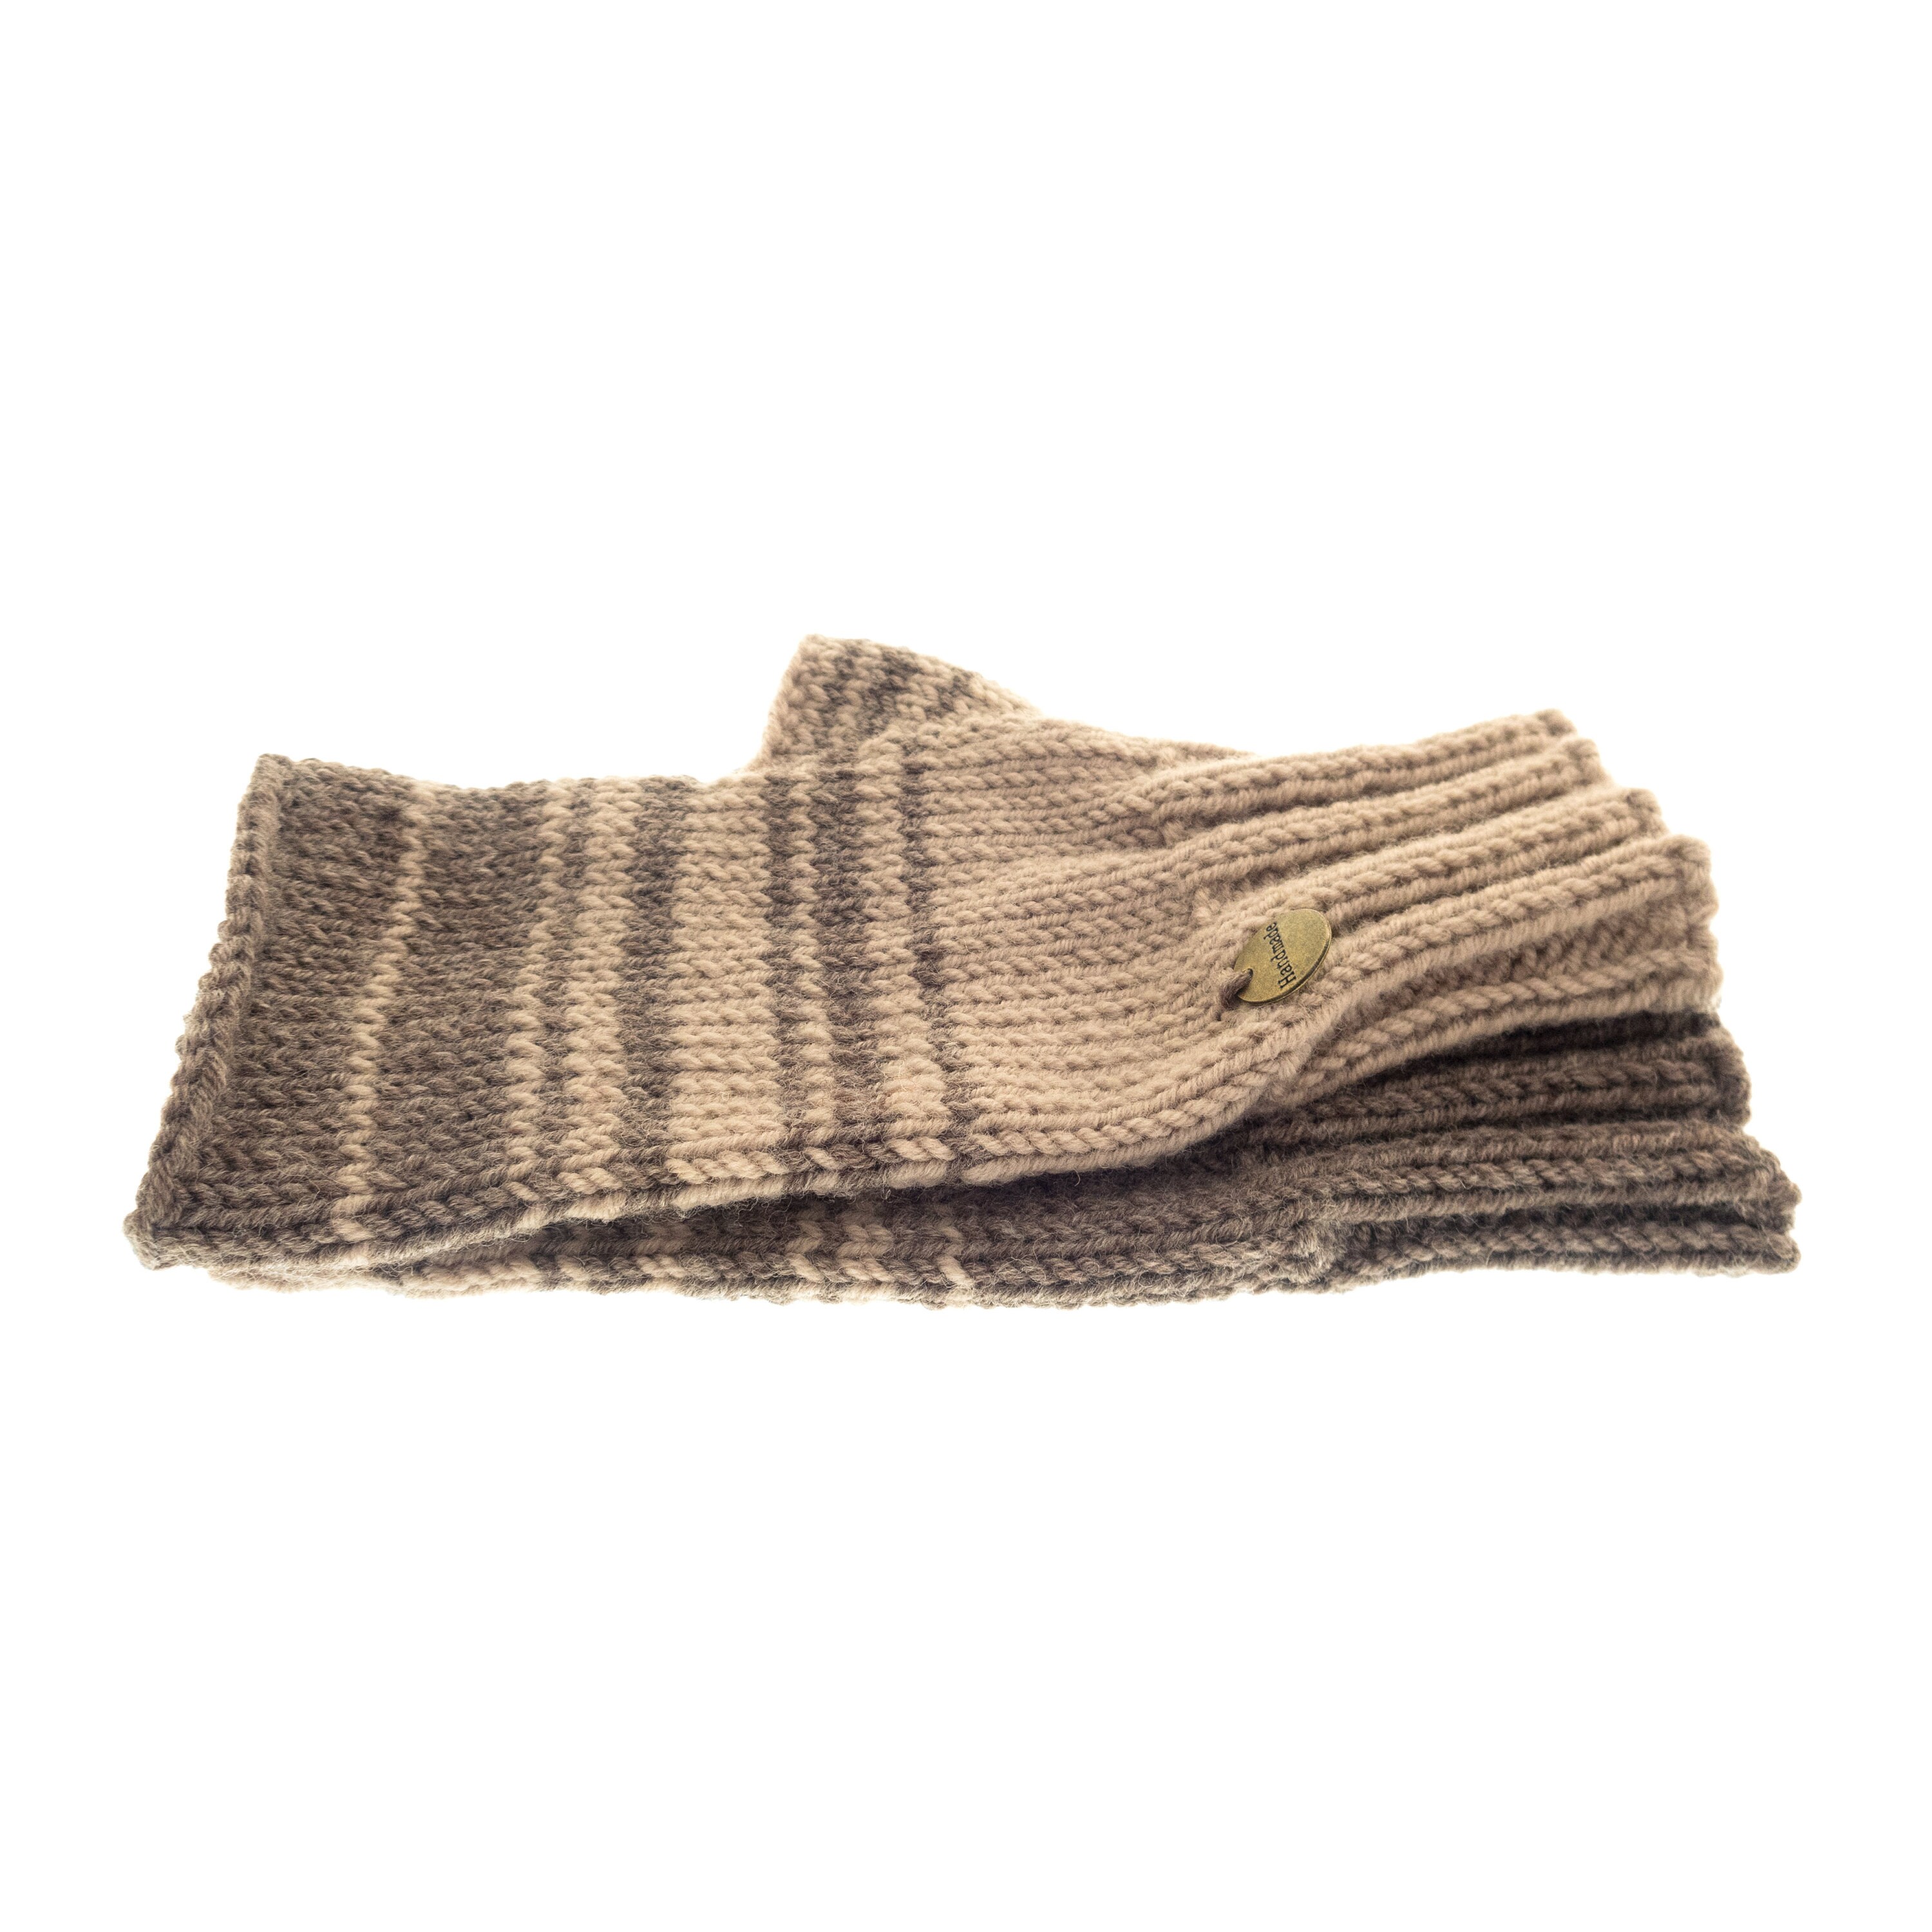 handmade warm mittens for adults with beige stripes